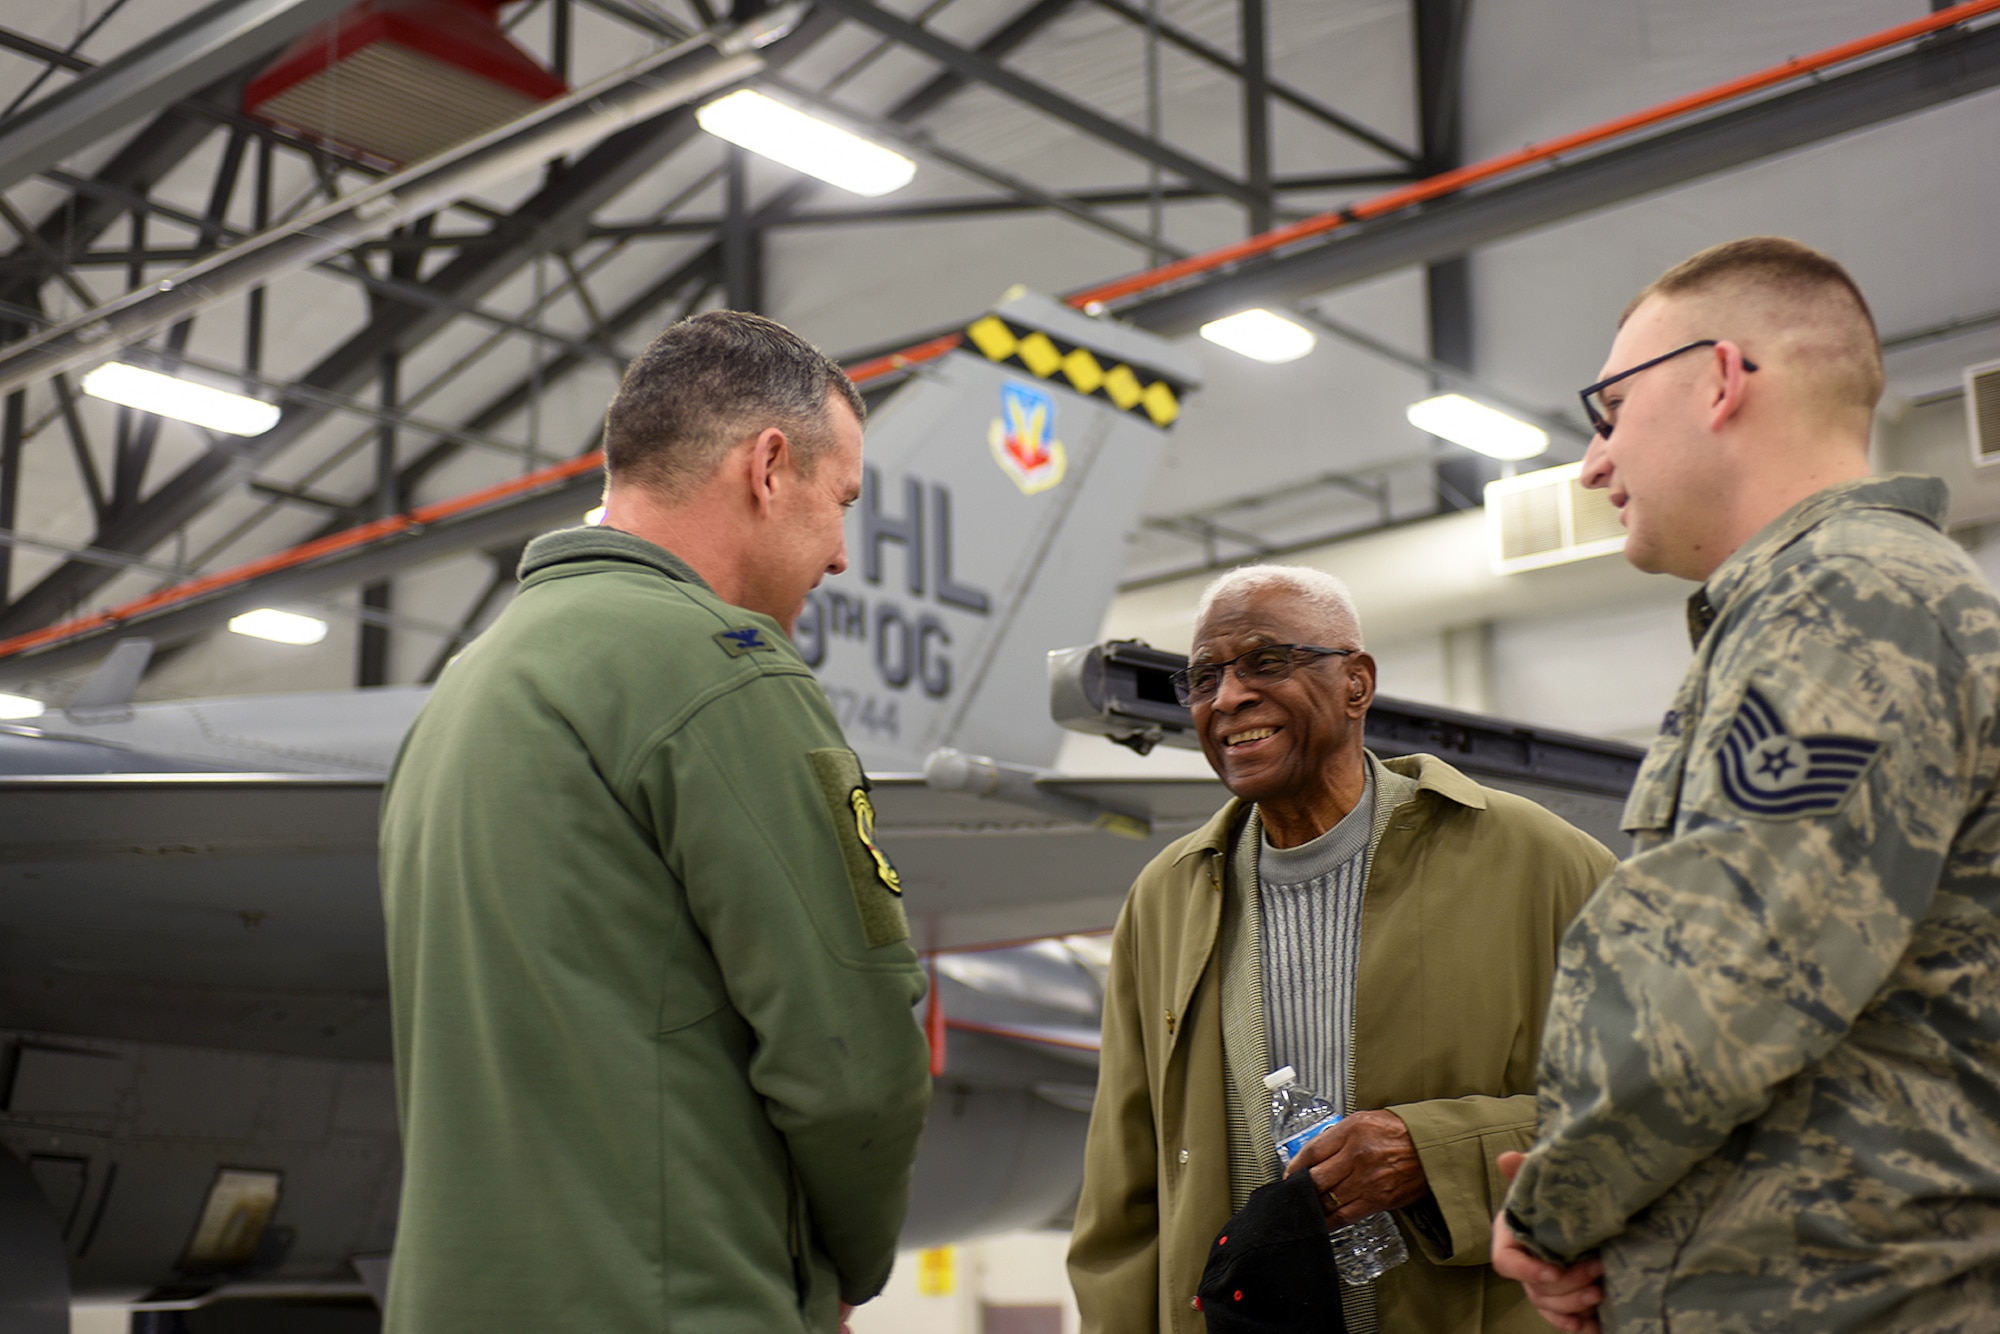 Retired Lt. Col. James H. Harvey III (center), member of the historic Tuskegee Airmen, talks to Col. David Smith, 419th Fighter Wing commander, and Tech. Sgt. David Batman, 419th Aircraft Maintenance Squadron, about the F-16 Fighting Falcon during a tour at Hill Air Force Base Feb. 11. (U.S. Air Force photo/Bryan Magaña)